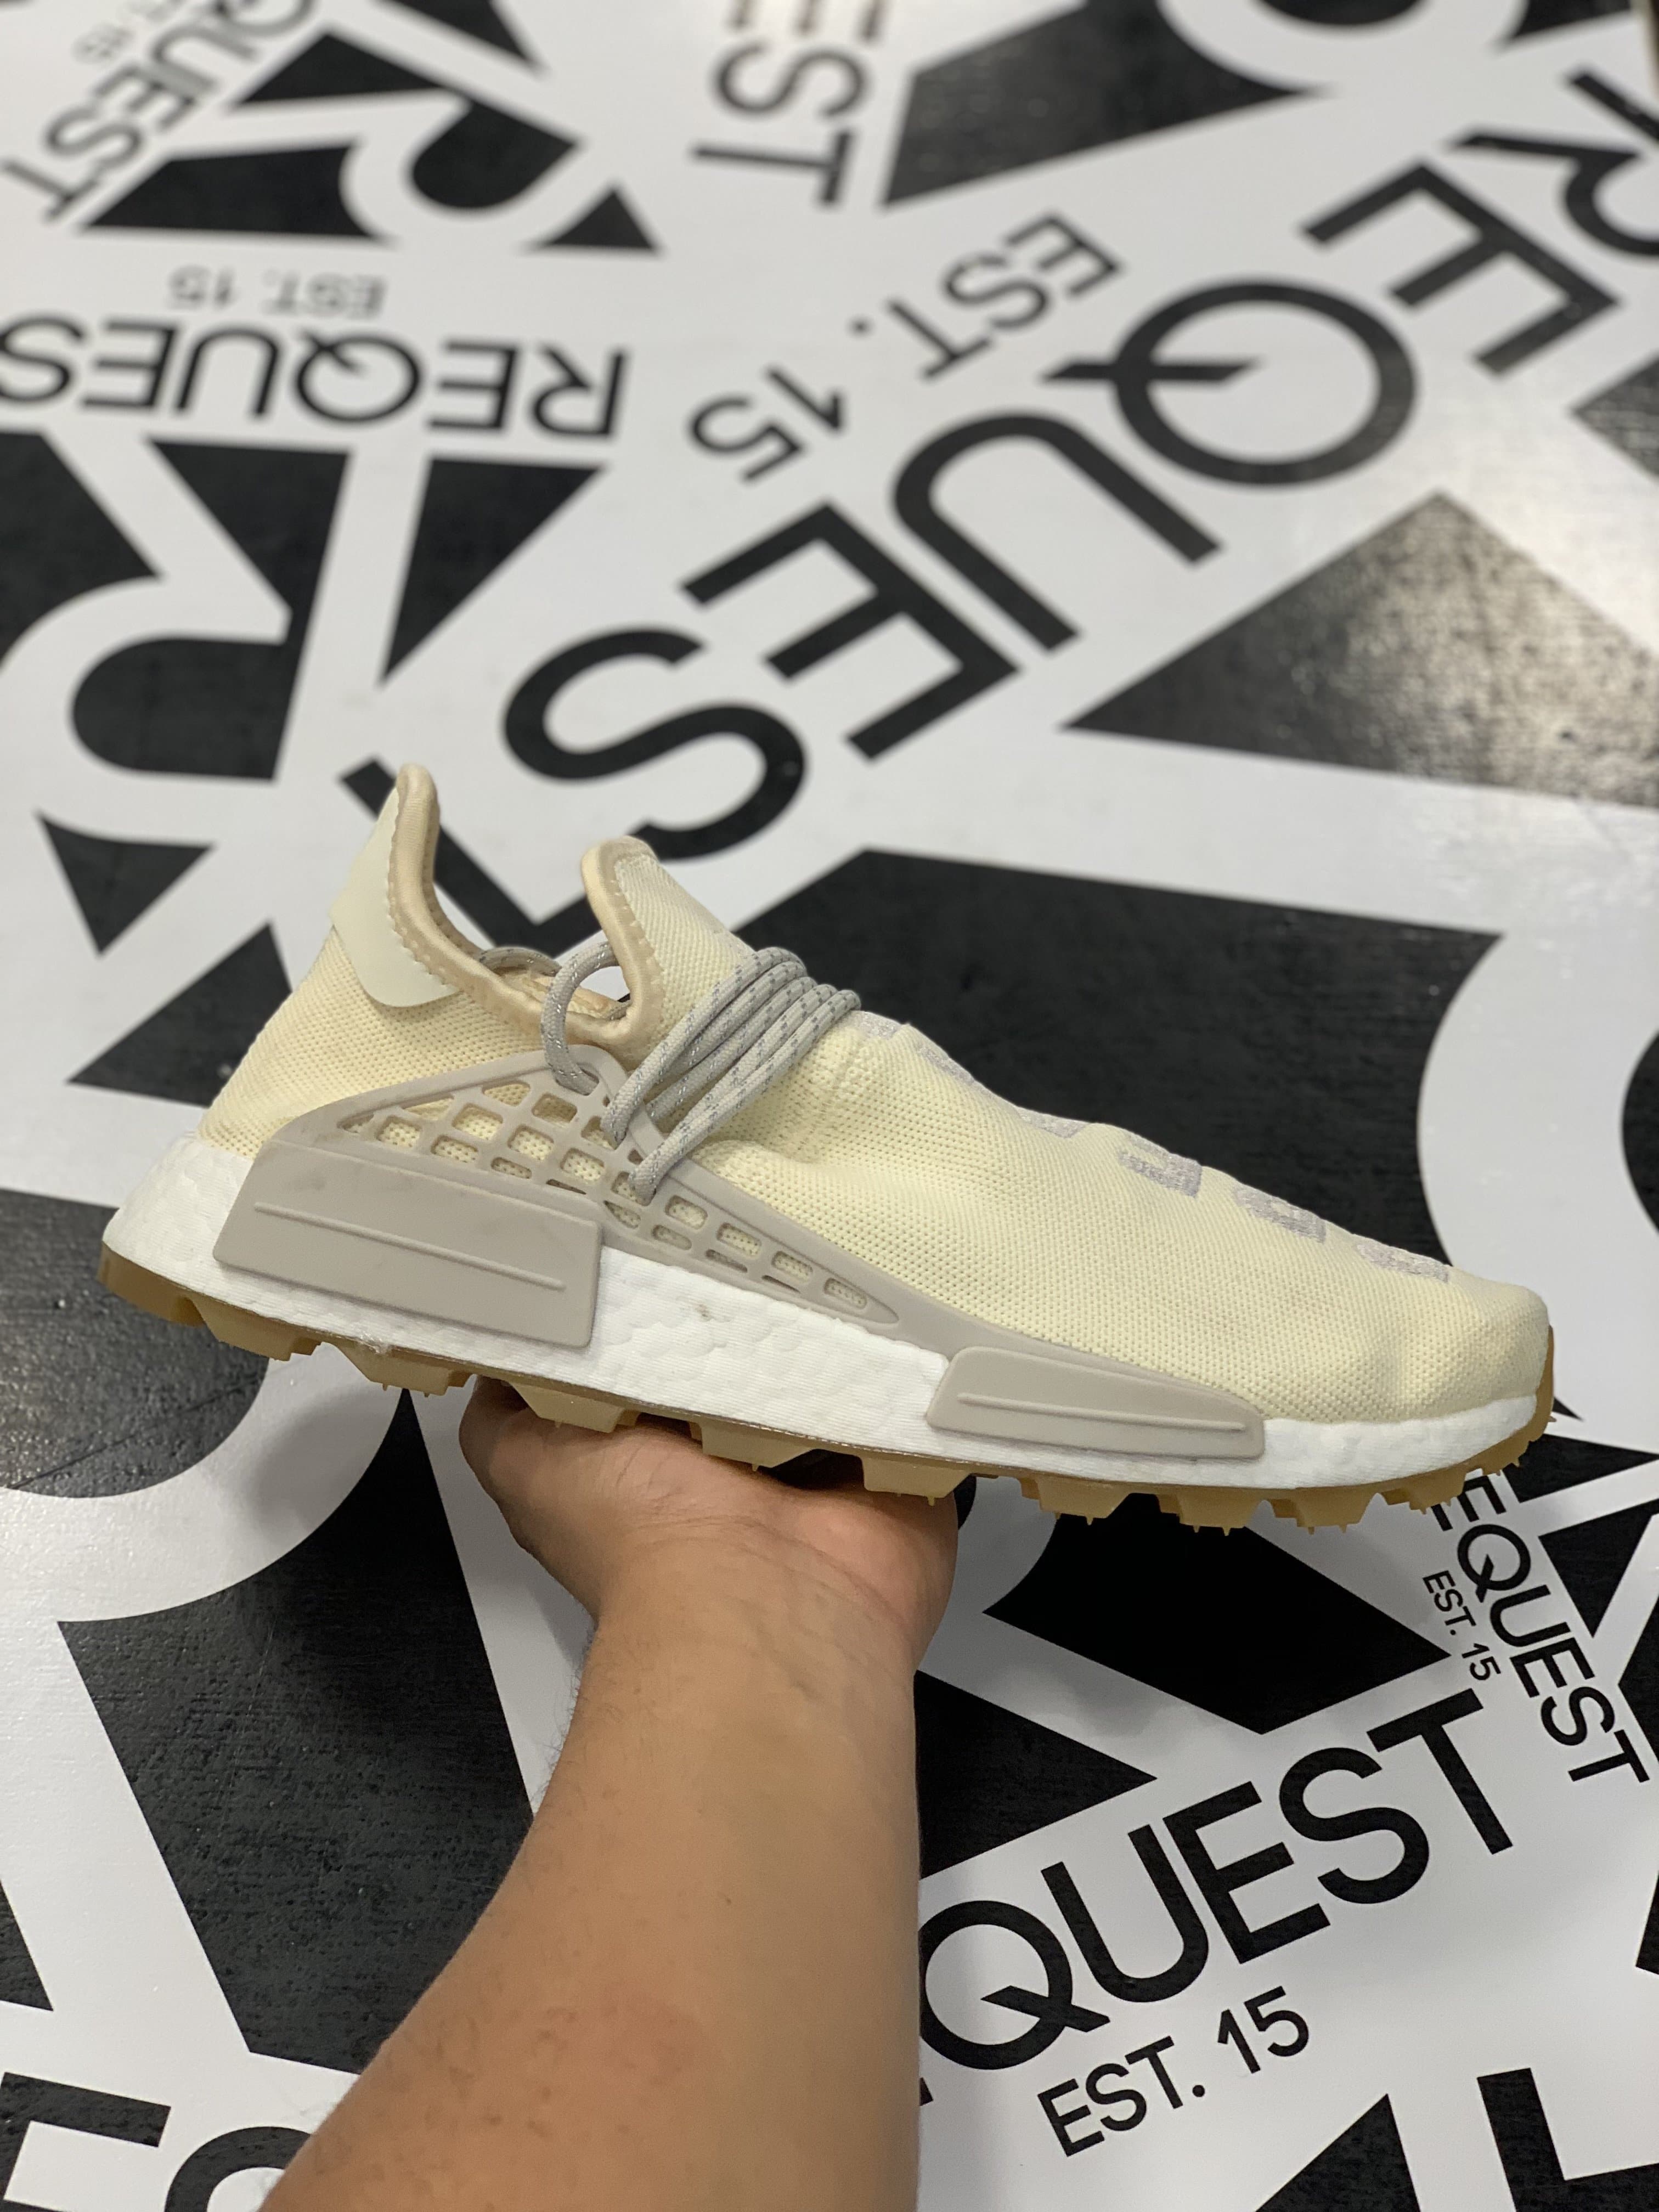 Adidas Human Race NMD “Now Is Her Time Cream”